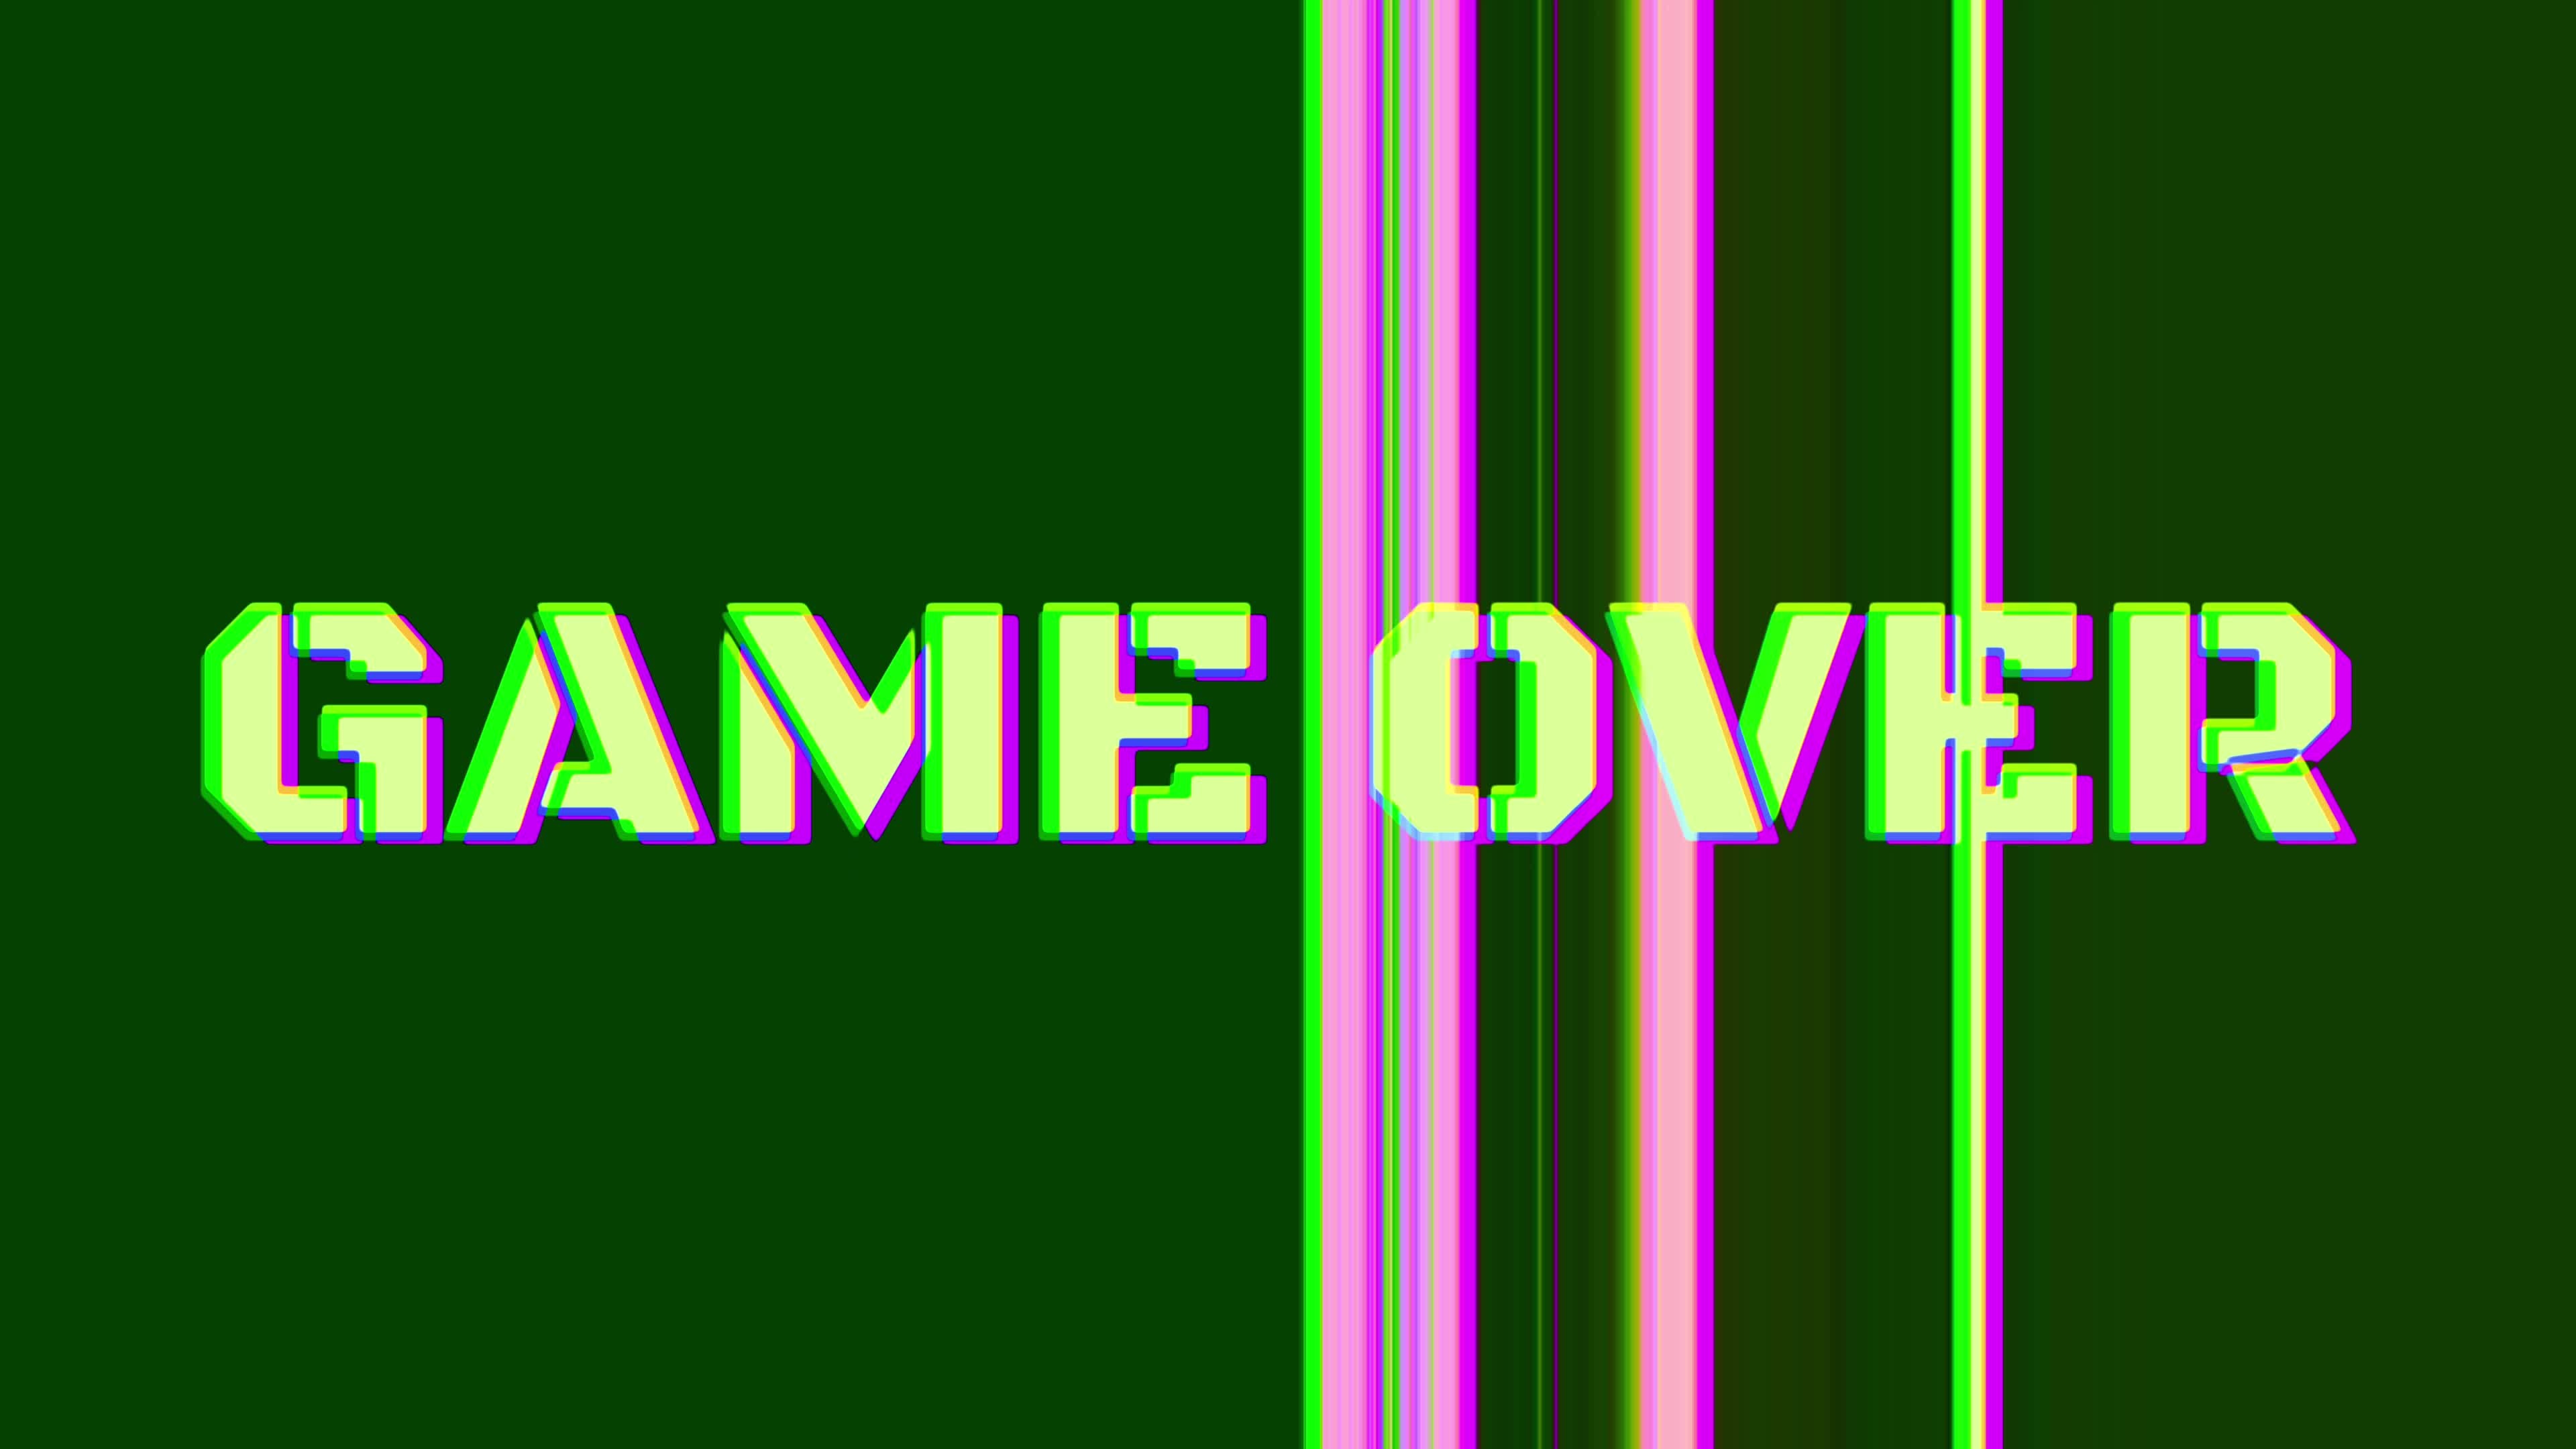 Game Over, Glitch background, Outro screen, Stock video, 3840x2160 4K Desktop